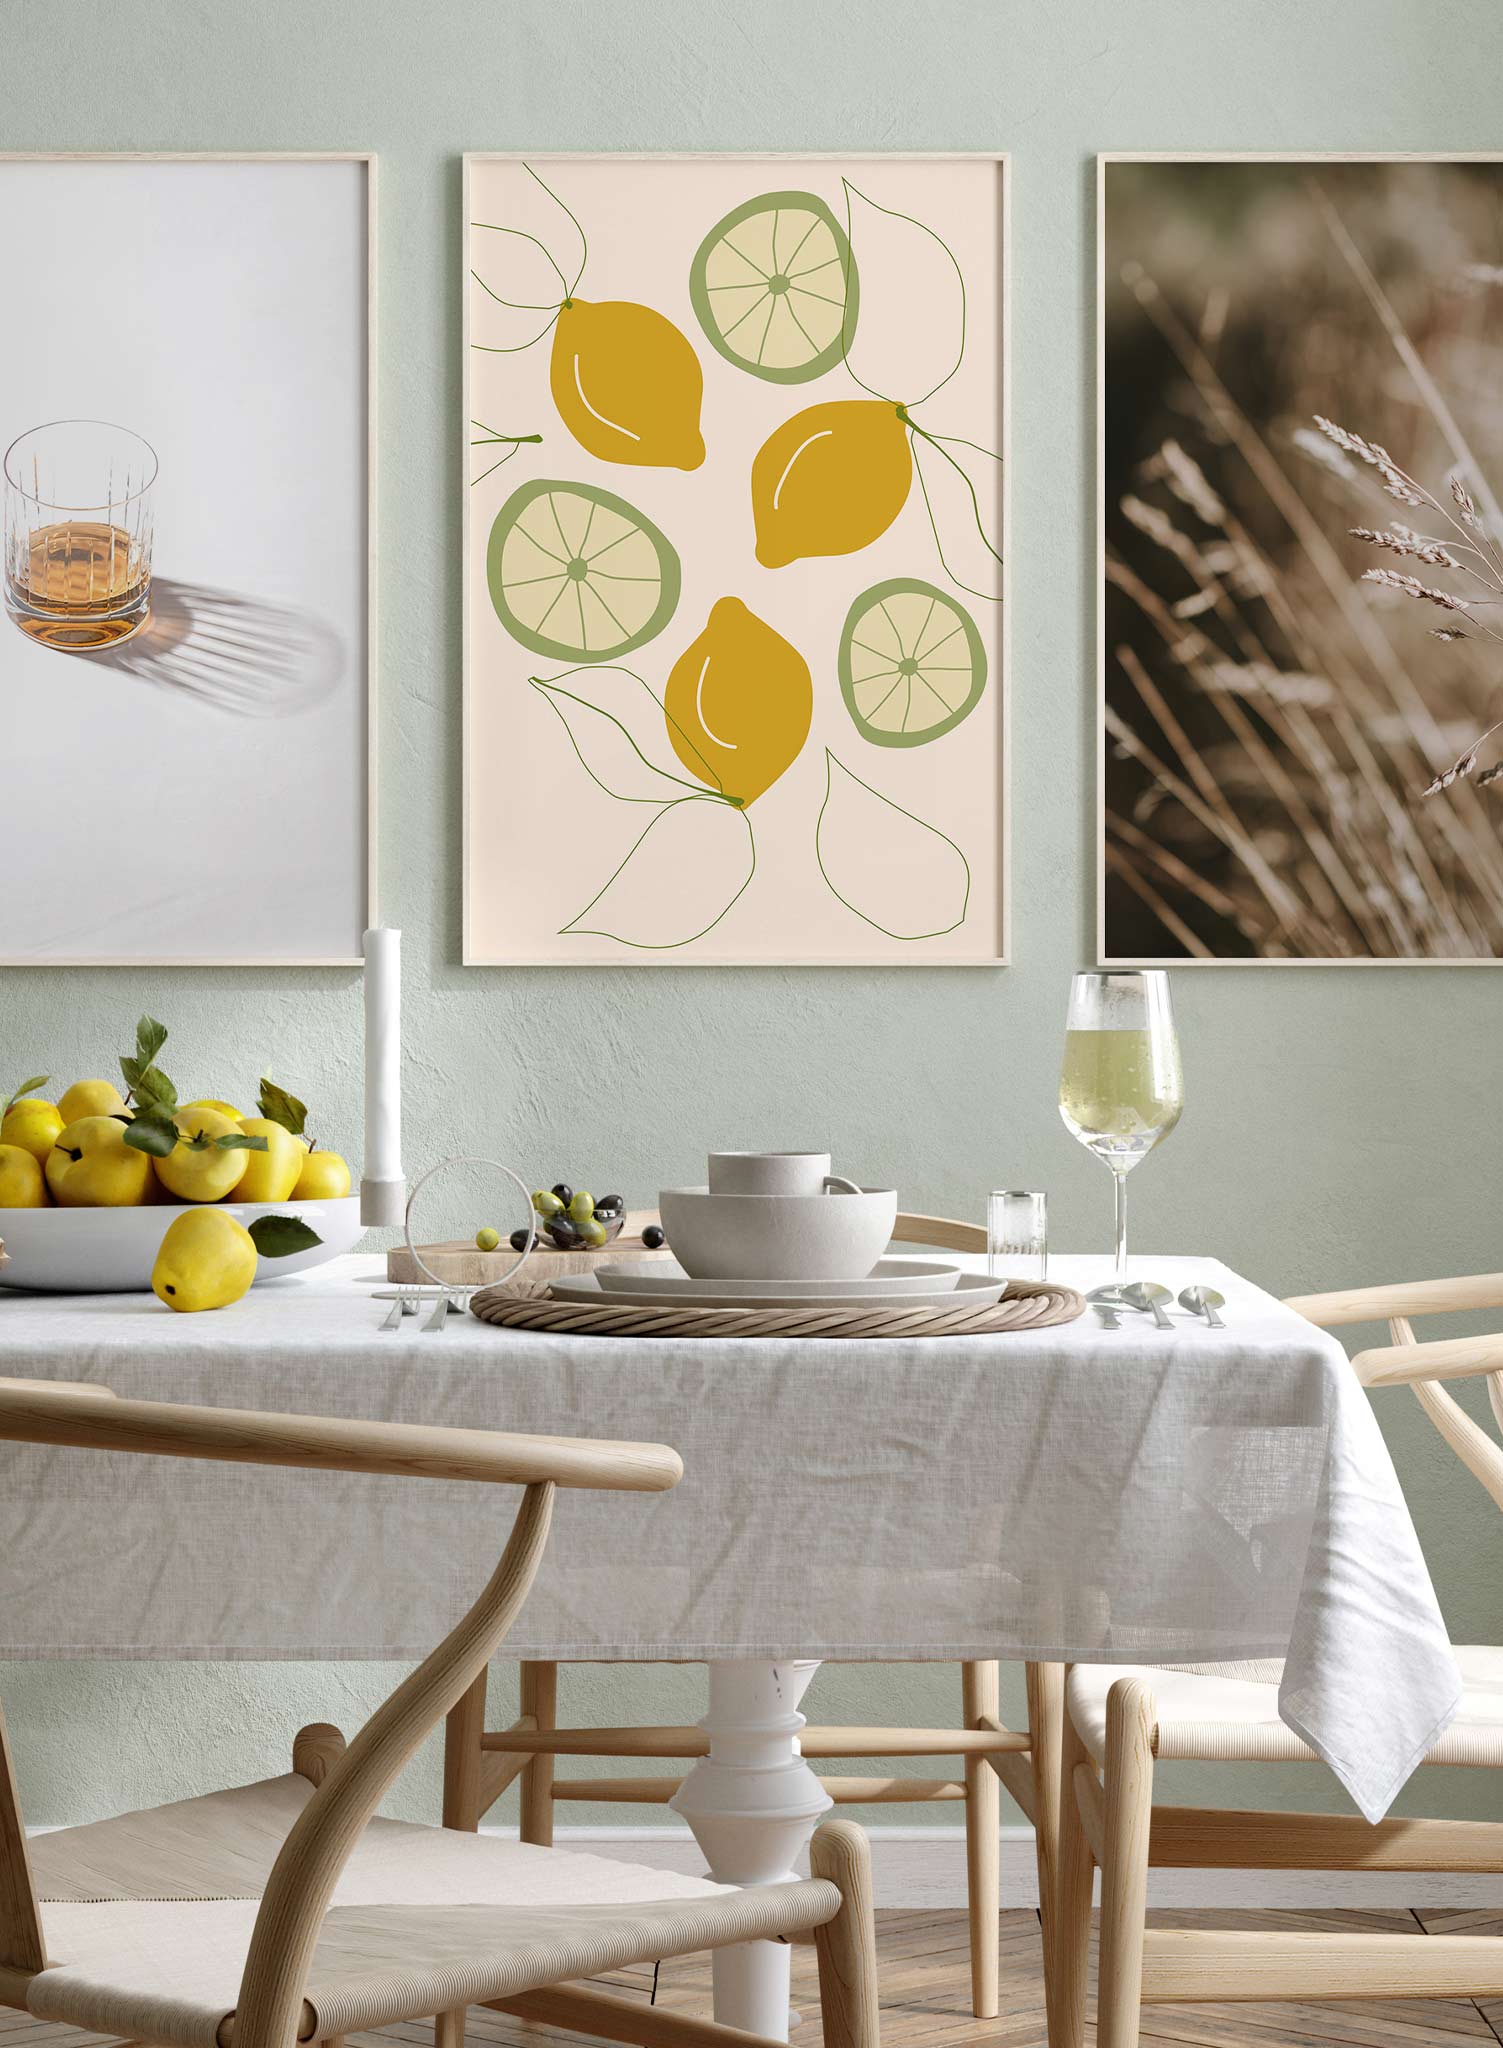 Zest for Life is a citrus illustration poster by Opposite Wall.